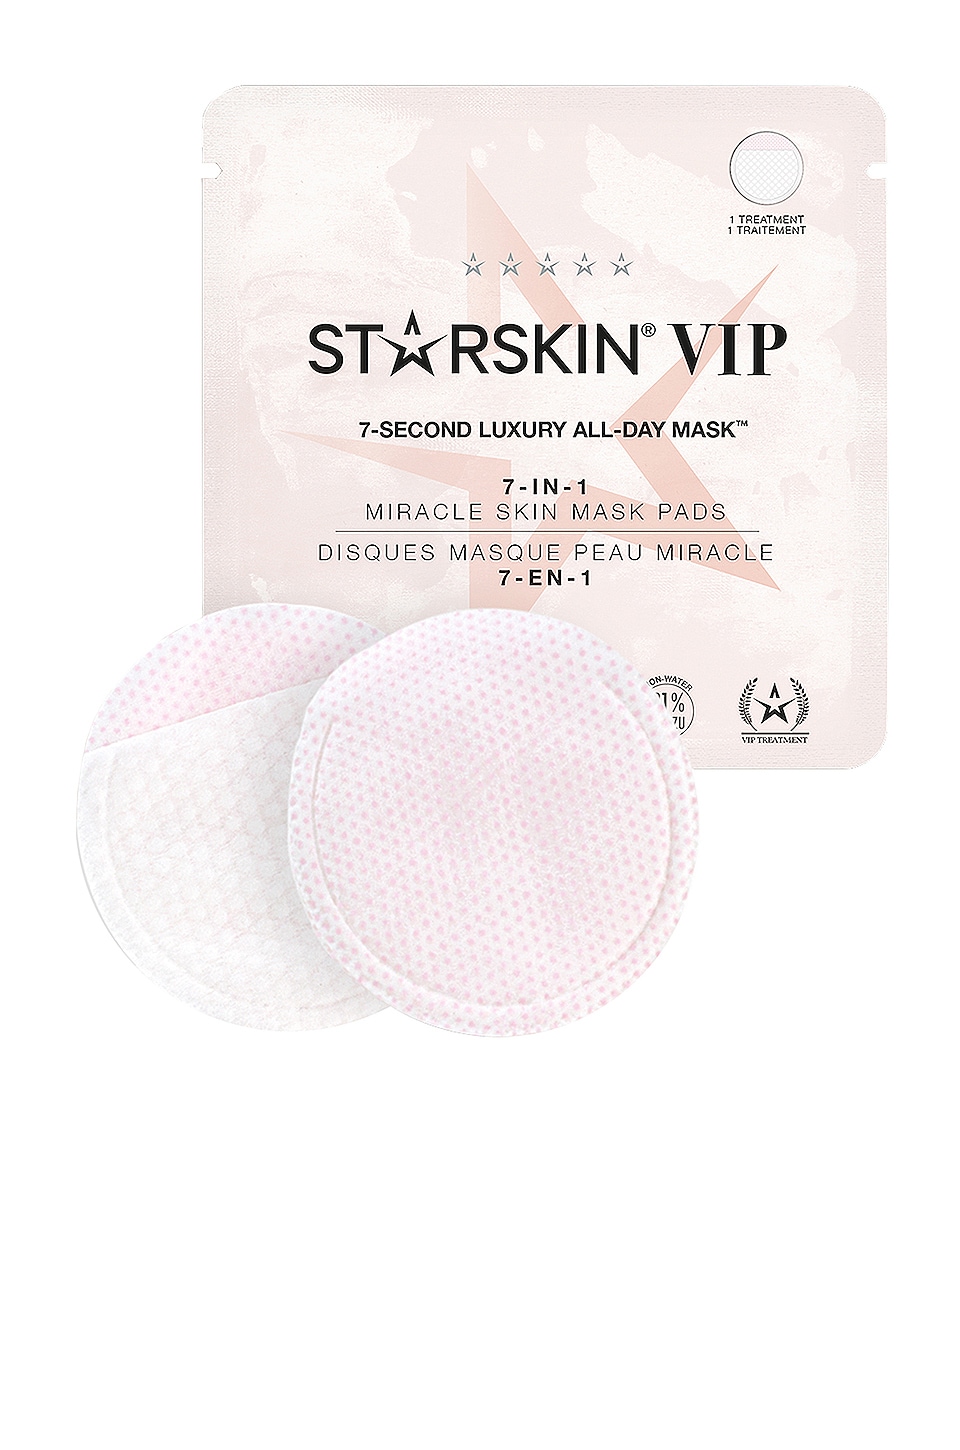 Starskin Vip 7-second Luxury All-day Mask Pad 18 Pack In N,a